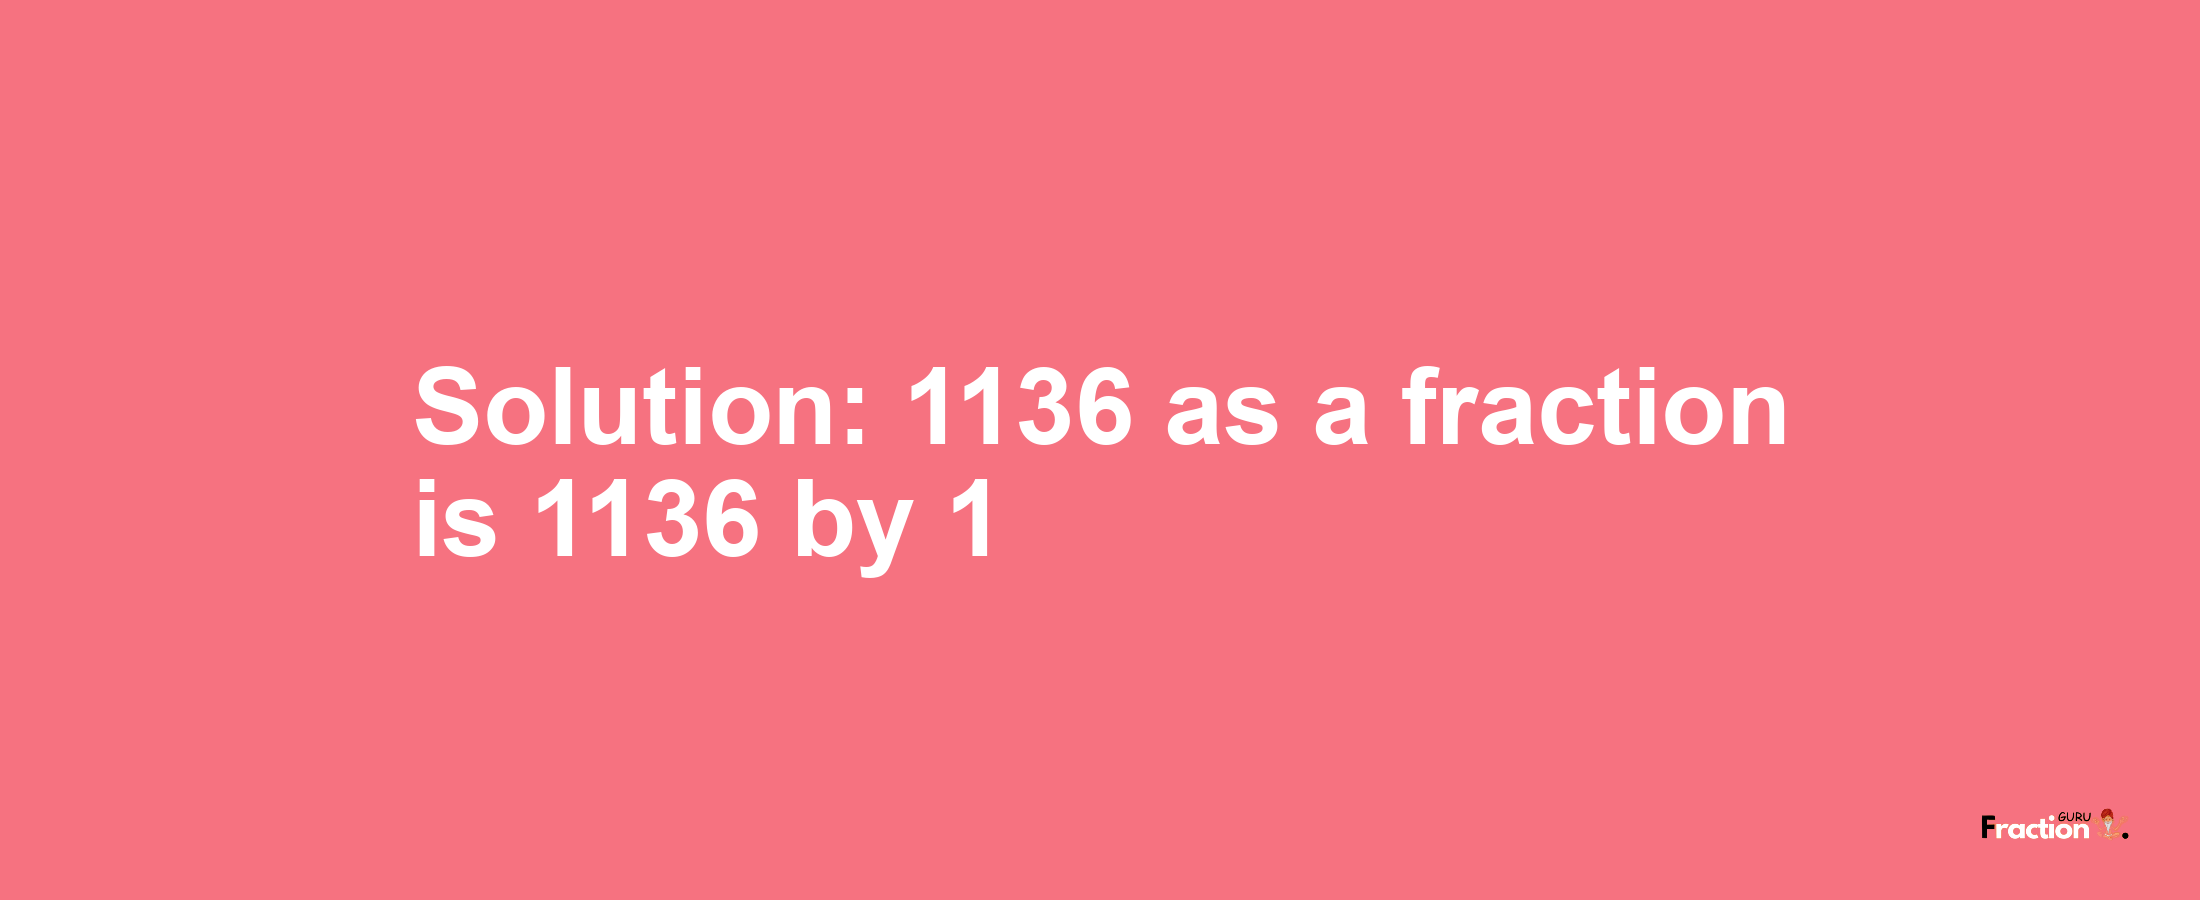 Solution:1136 as a fraction is 1136/1